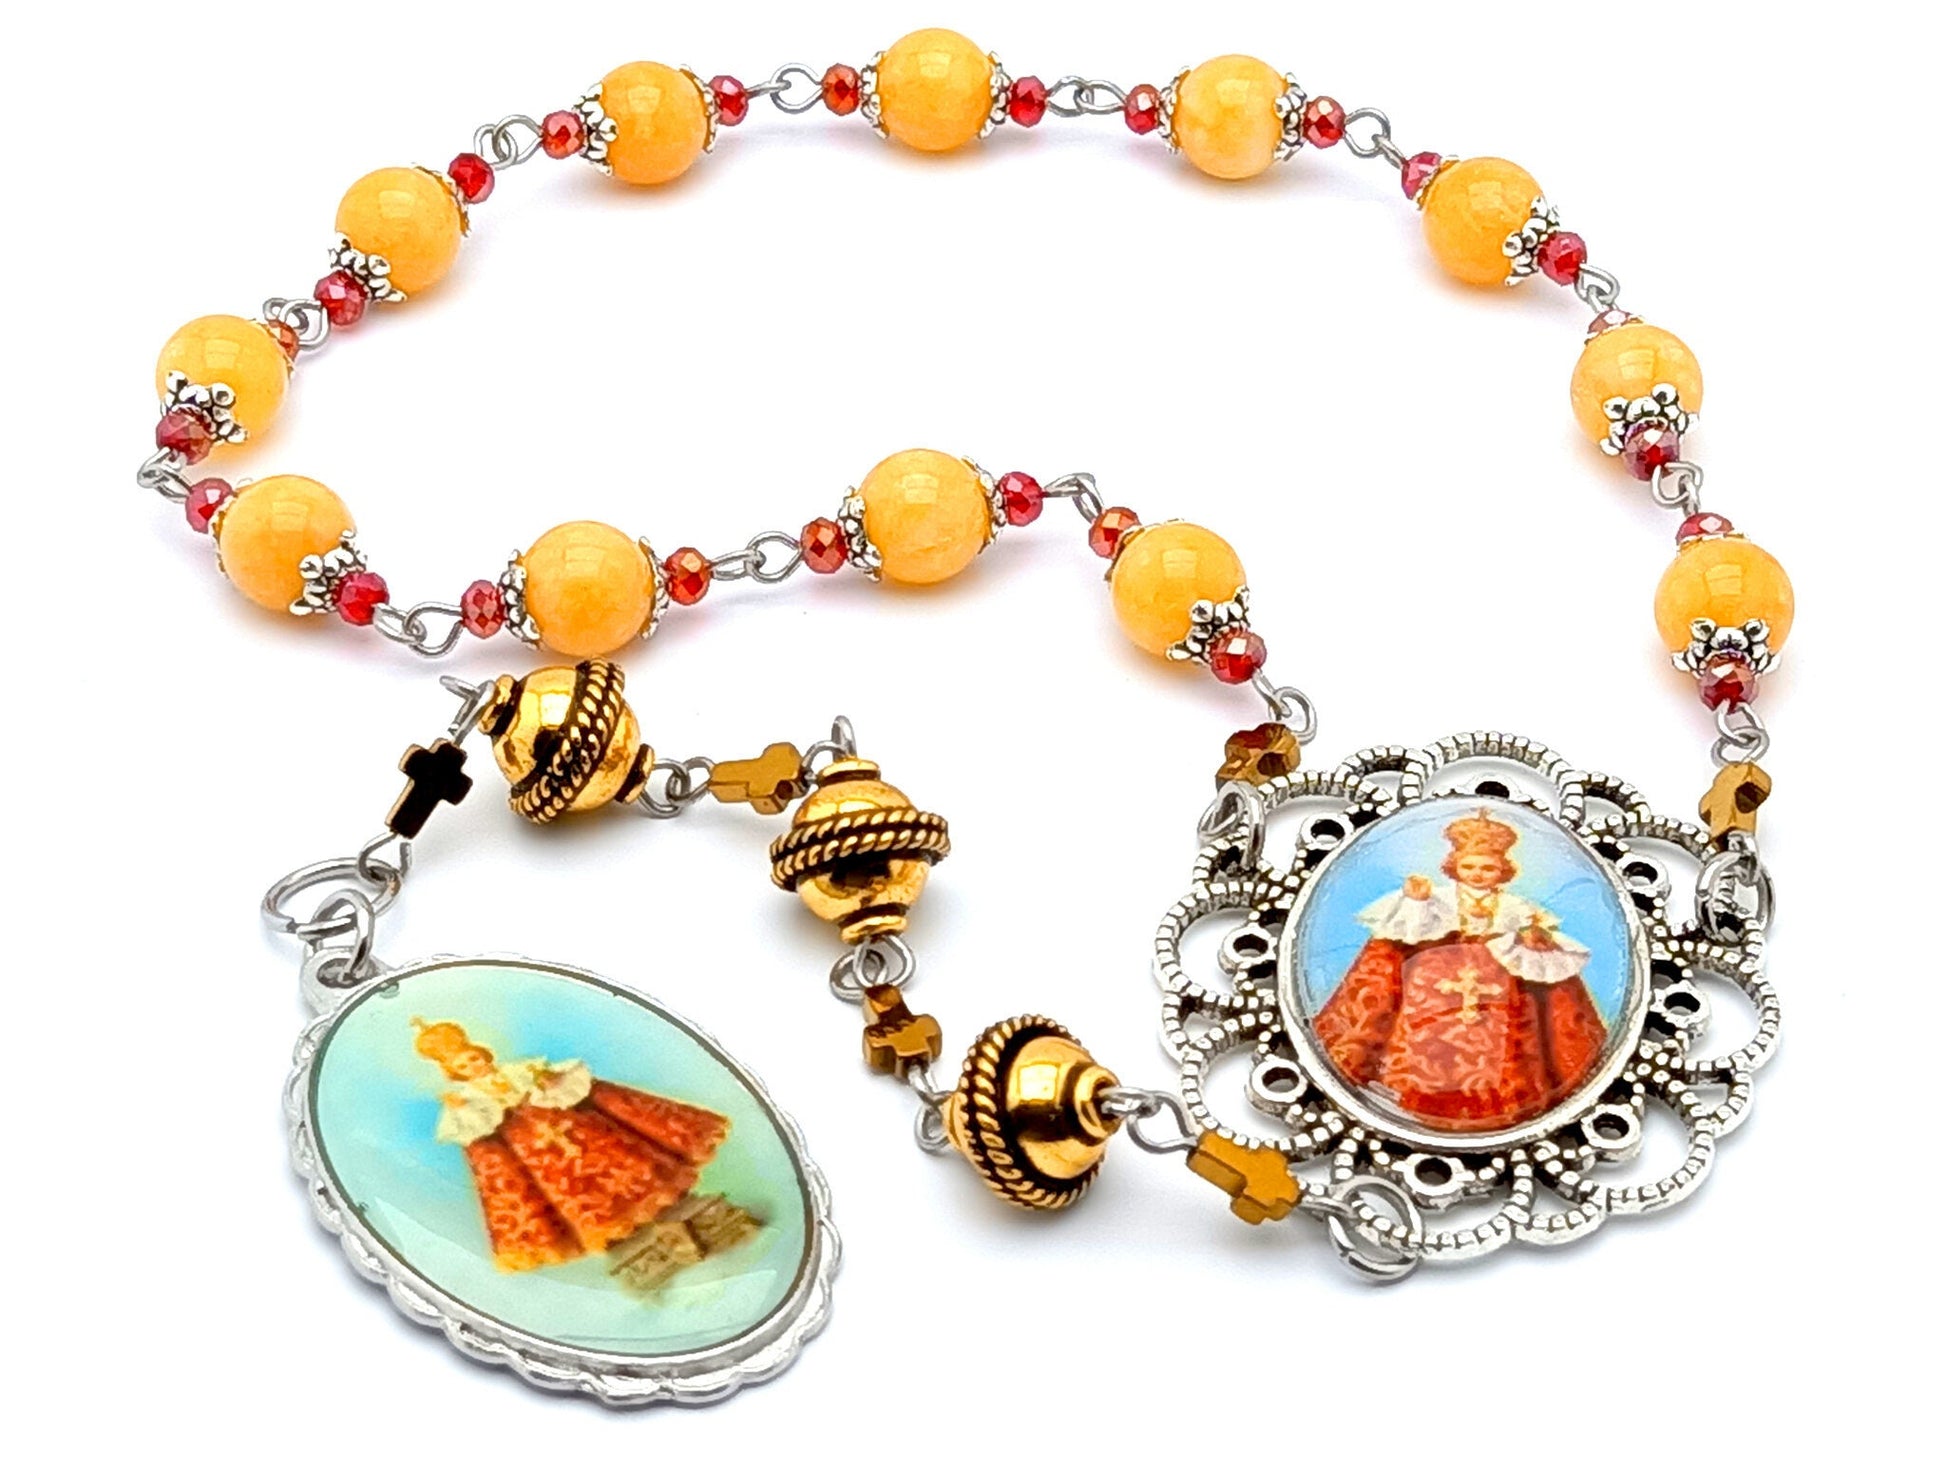 Infant of Prague unique rpsary beads prayer chaplet with agate gemstone beads, filigree picture medal and gold Bali beads.